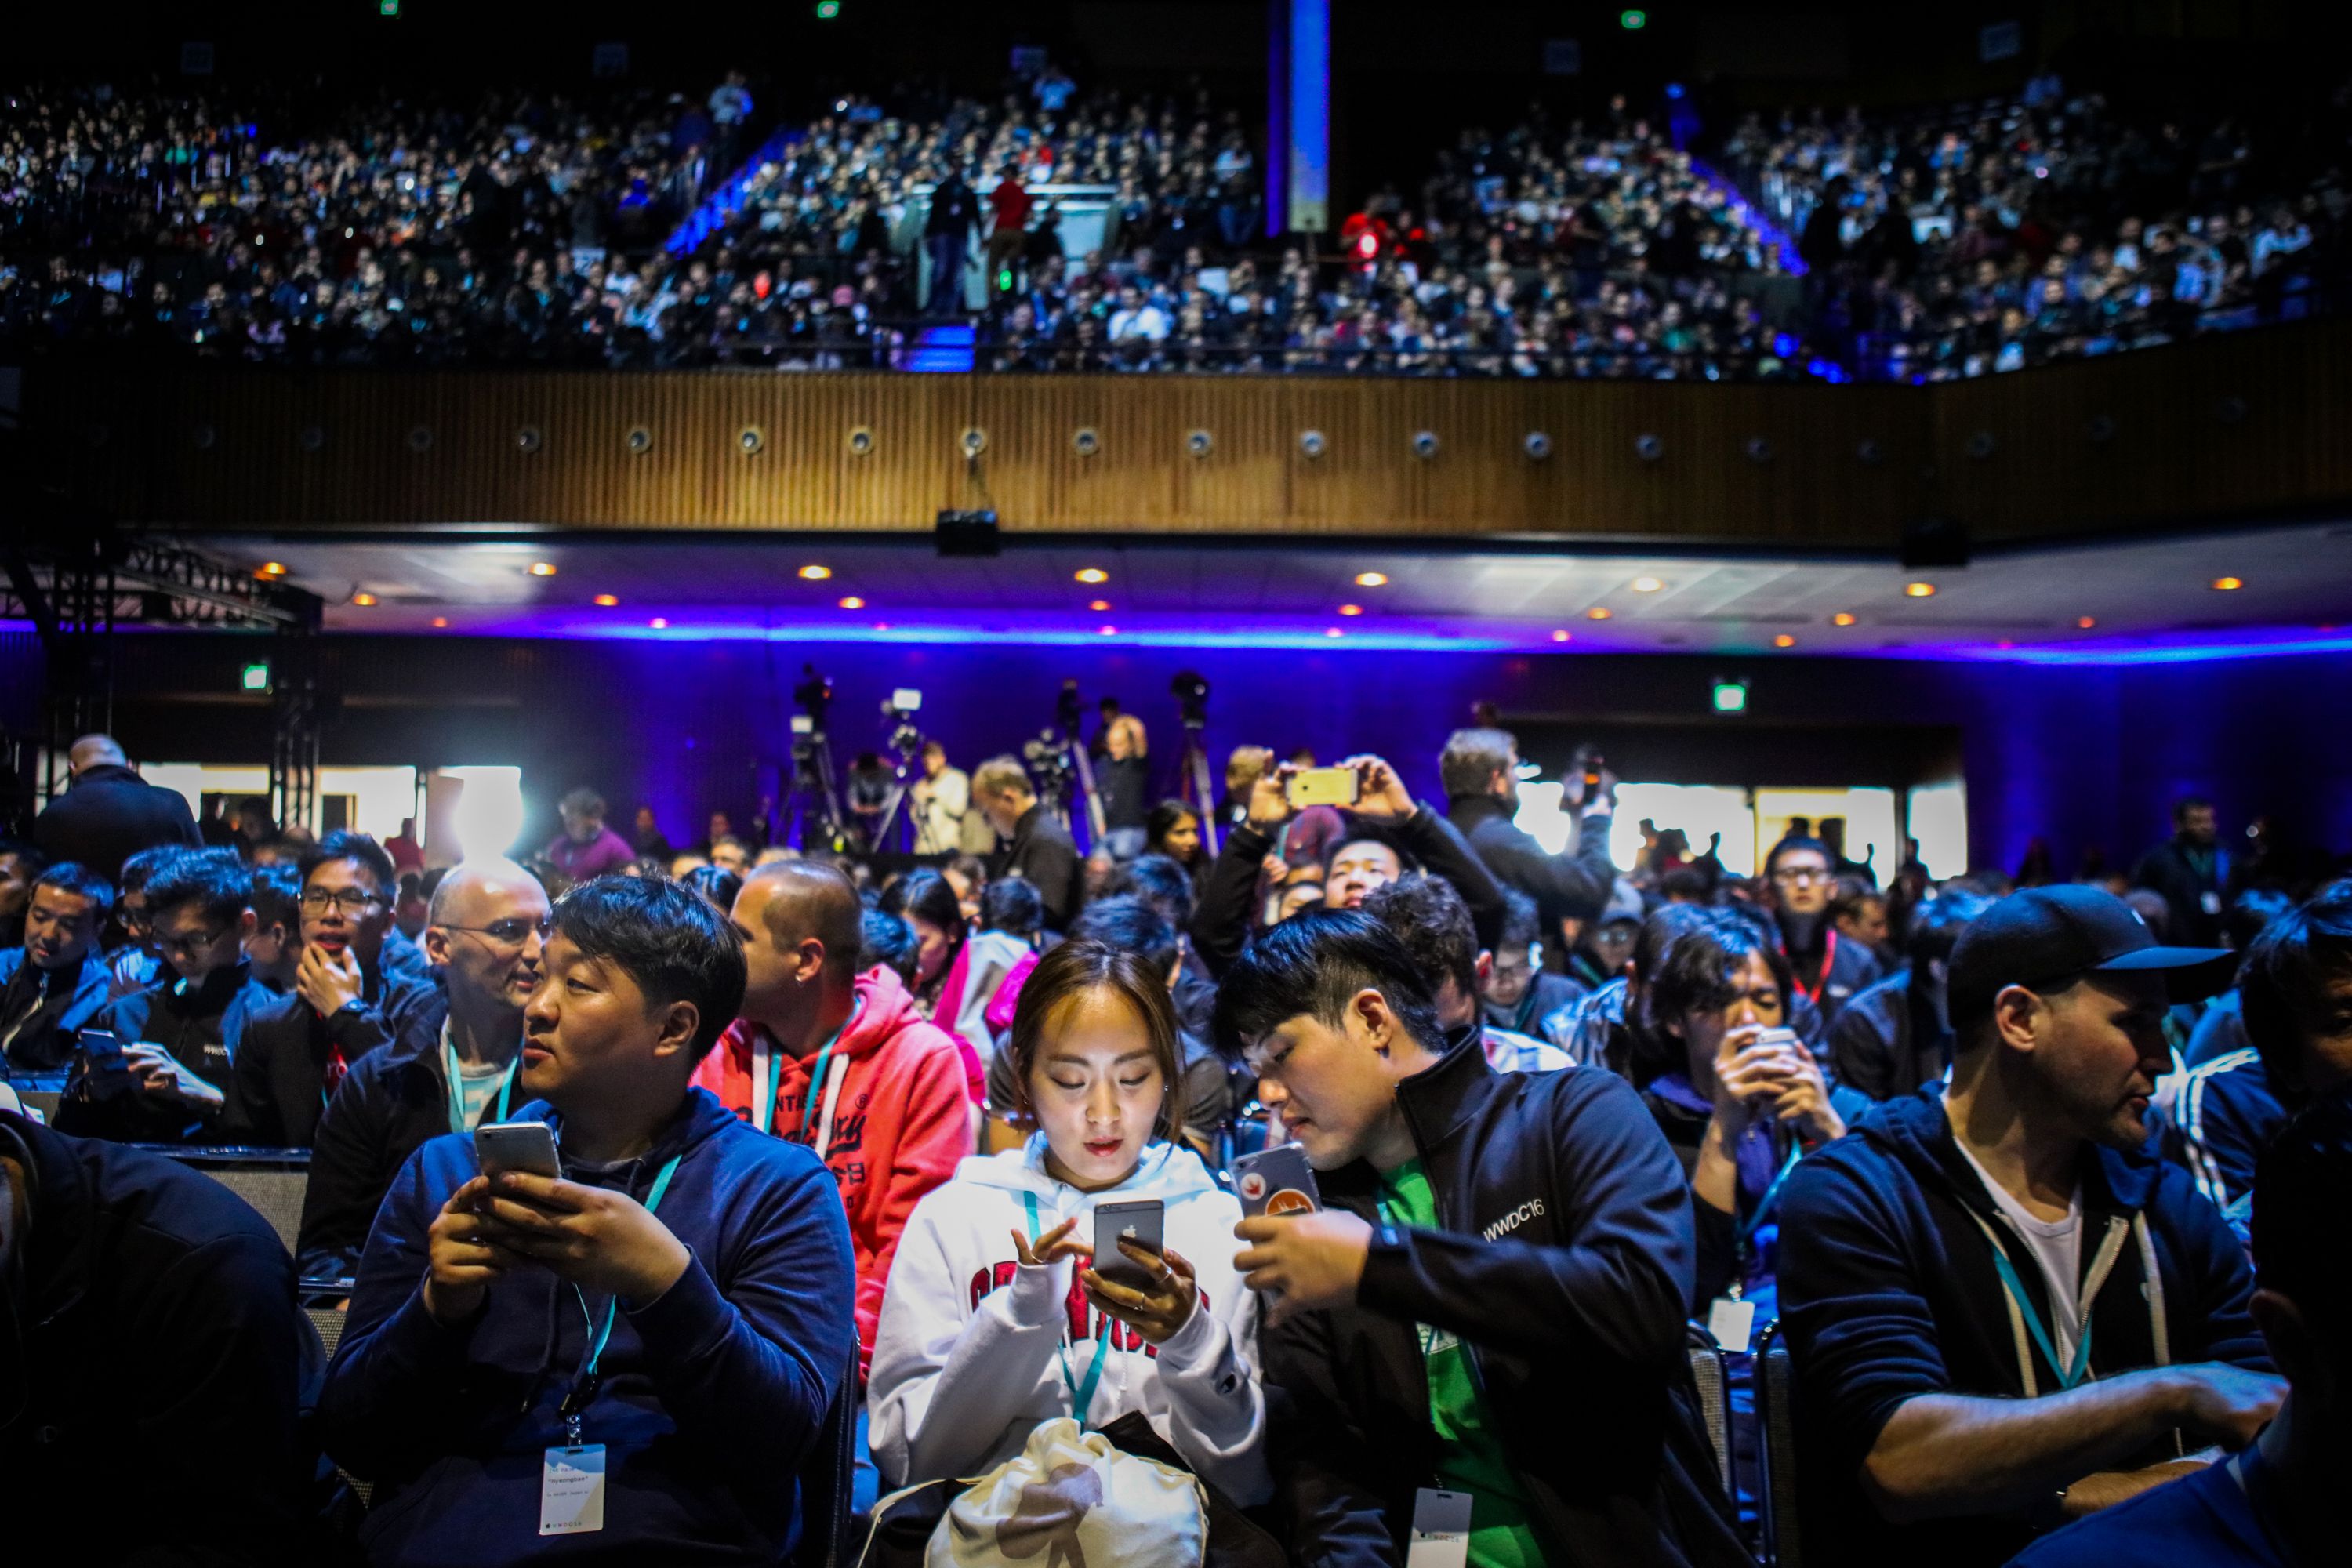 Attendees work on their devices ahead of Apple's annual Worldwide Developers Conference in San Francisco, California on June 13, 2016. (Gabrielle Lurie&mdash;AFP/Getty Images)